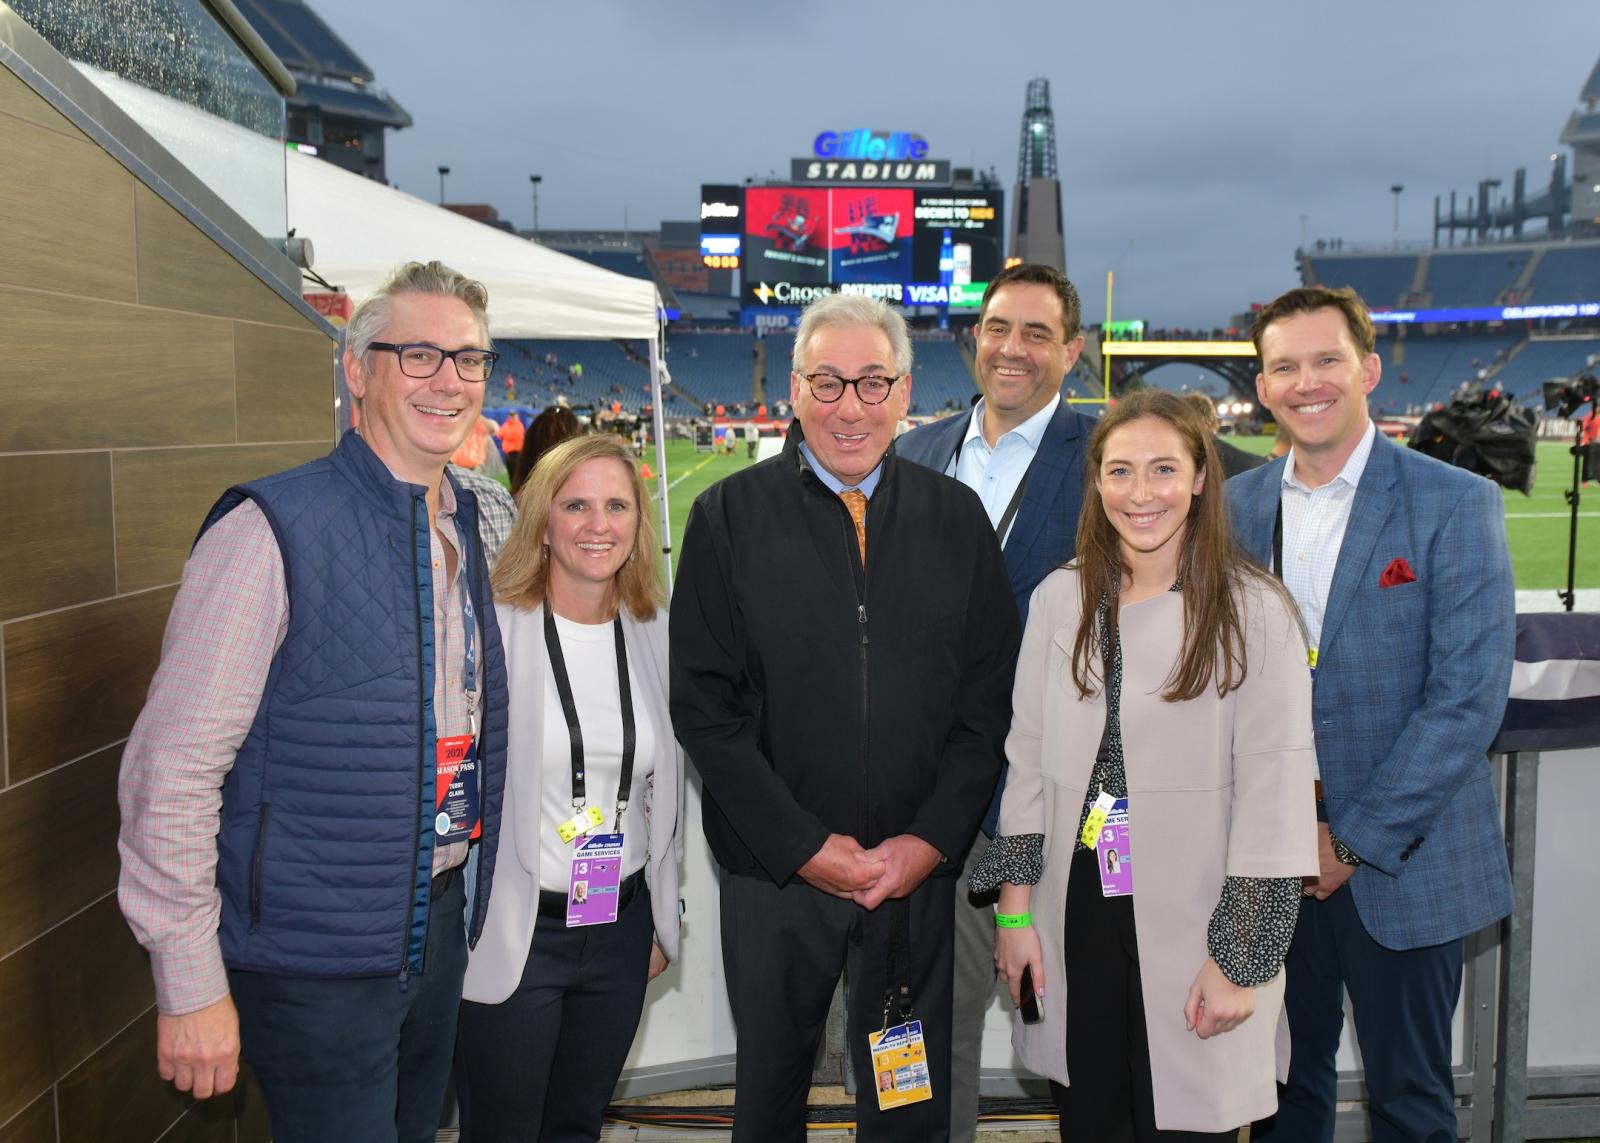 Members of the UnitedHealth Group sponsorships team before a Patriots game with famed ESPN reporter Sal Paolantonio 